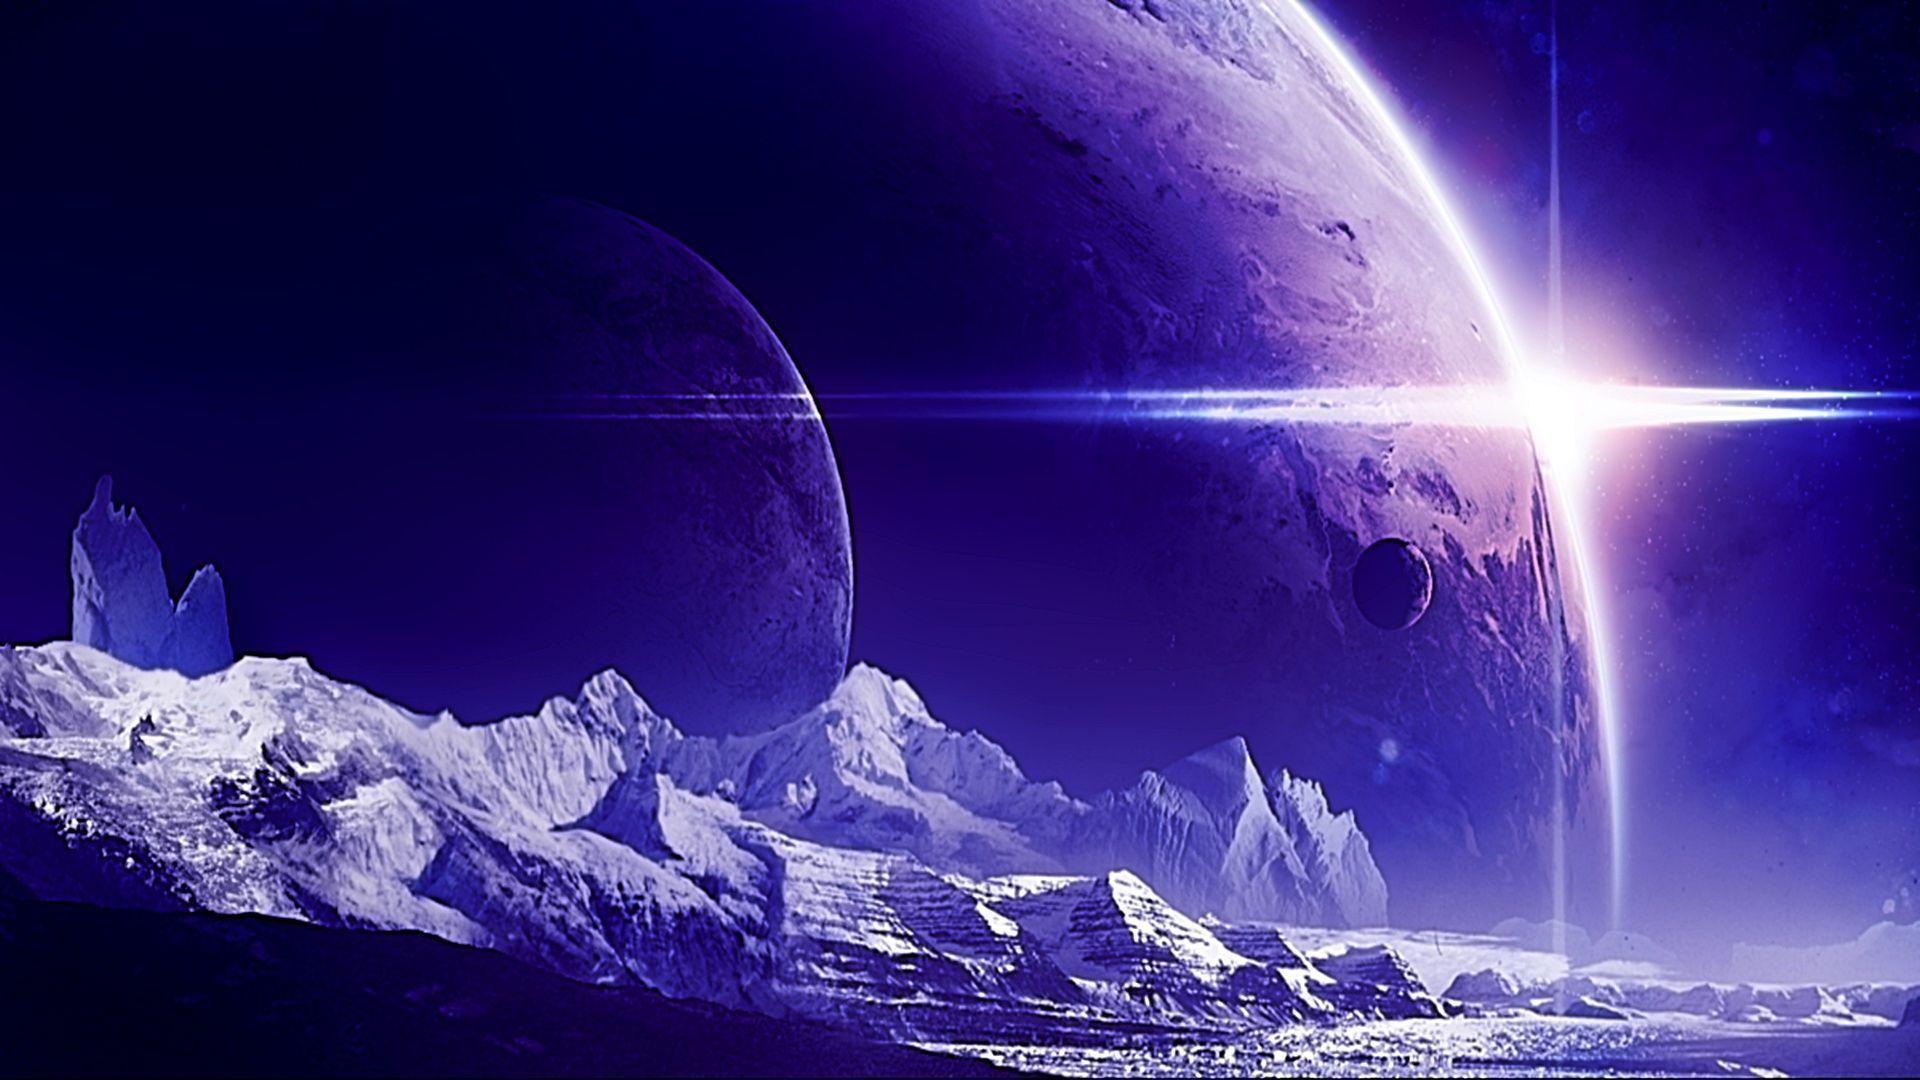 fantasy space pictures – 1920×1080 High Definition Wallpapers